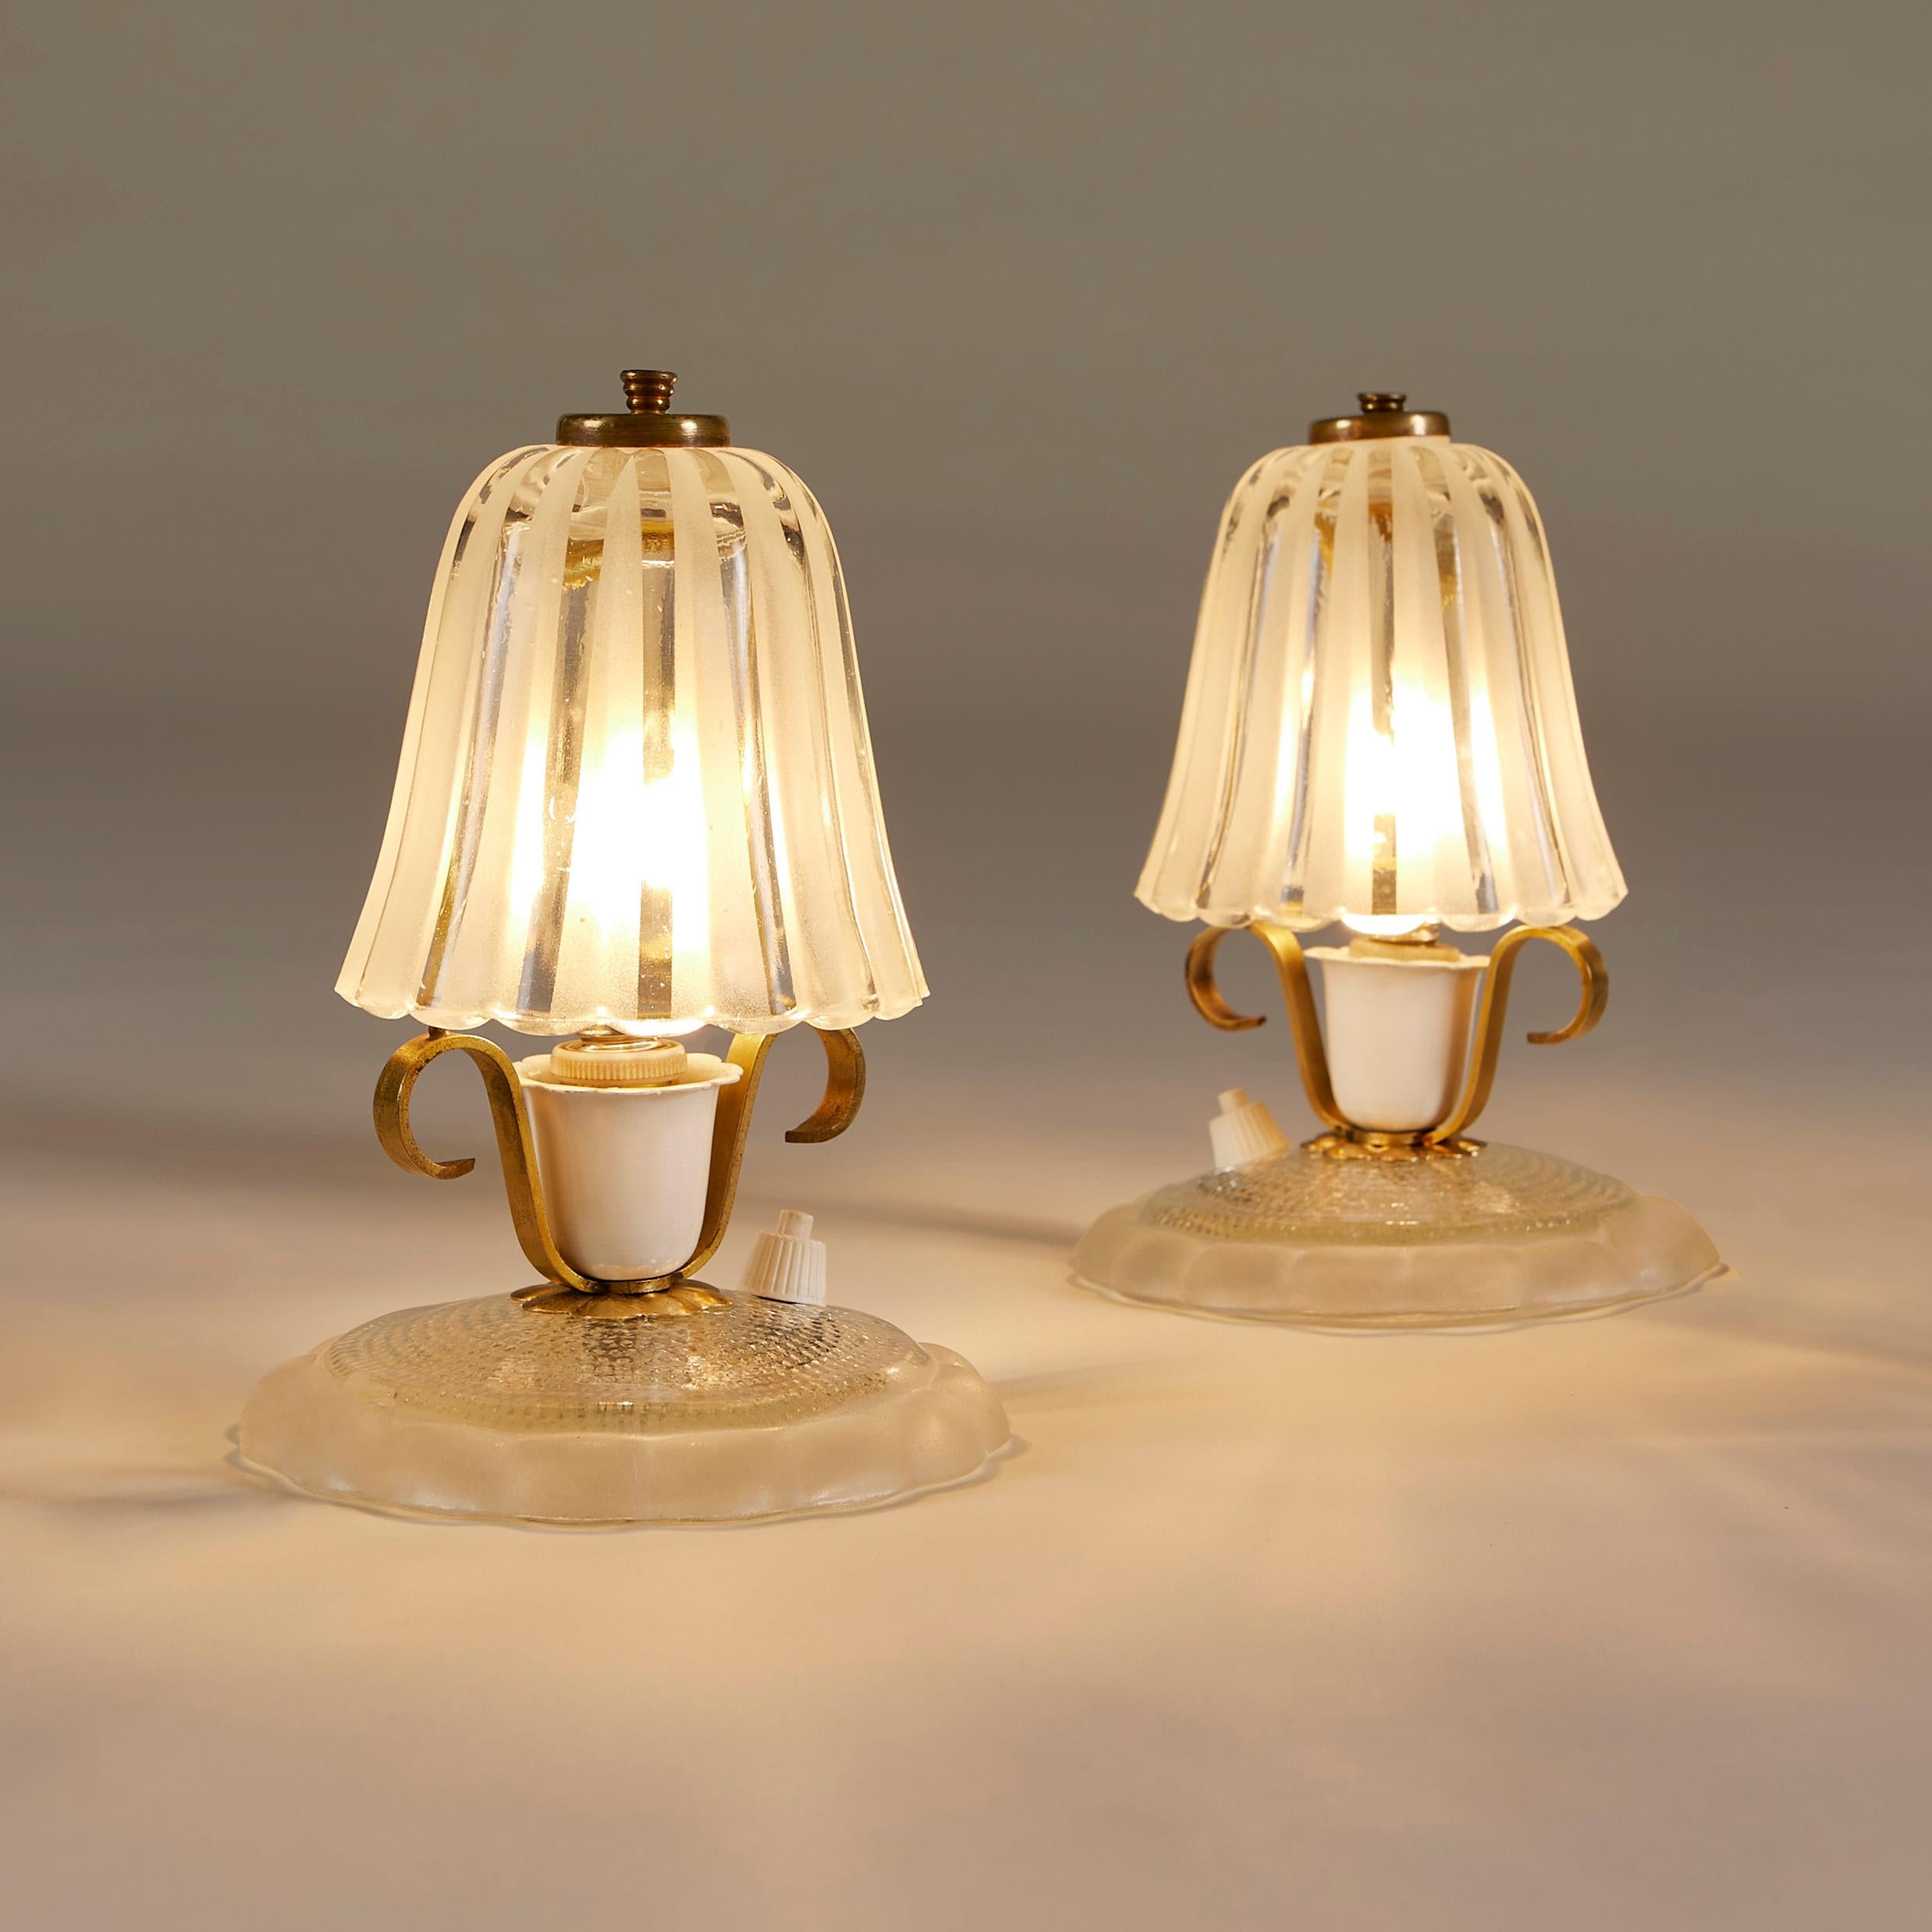 Pair of Italian 1950s glass and brass table lamps In Good Condition For Sale In London, GB